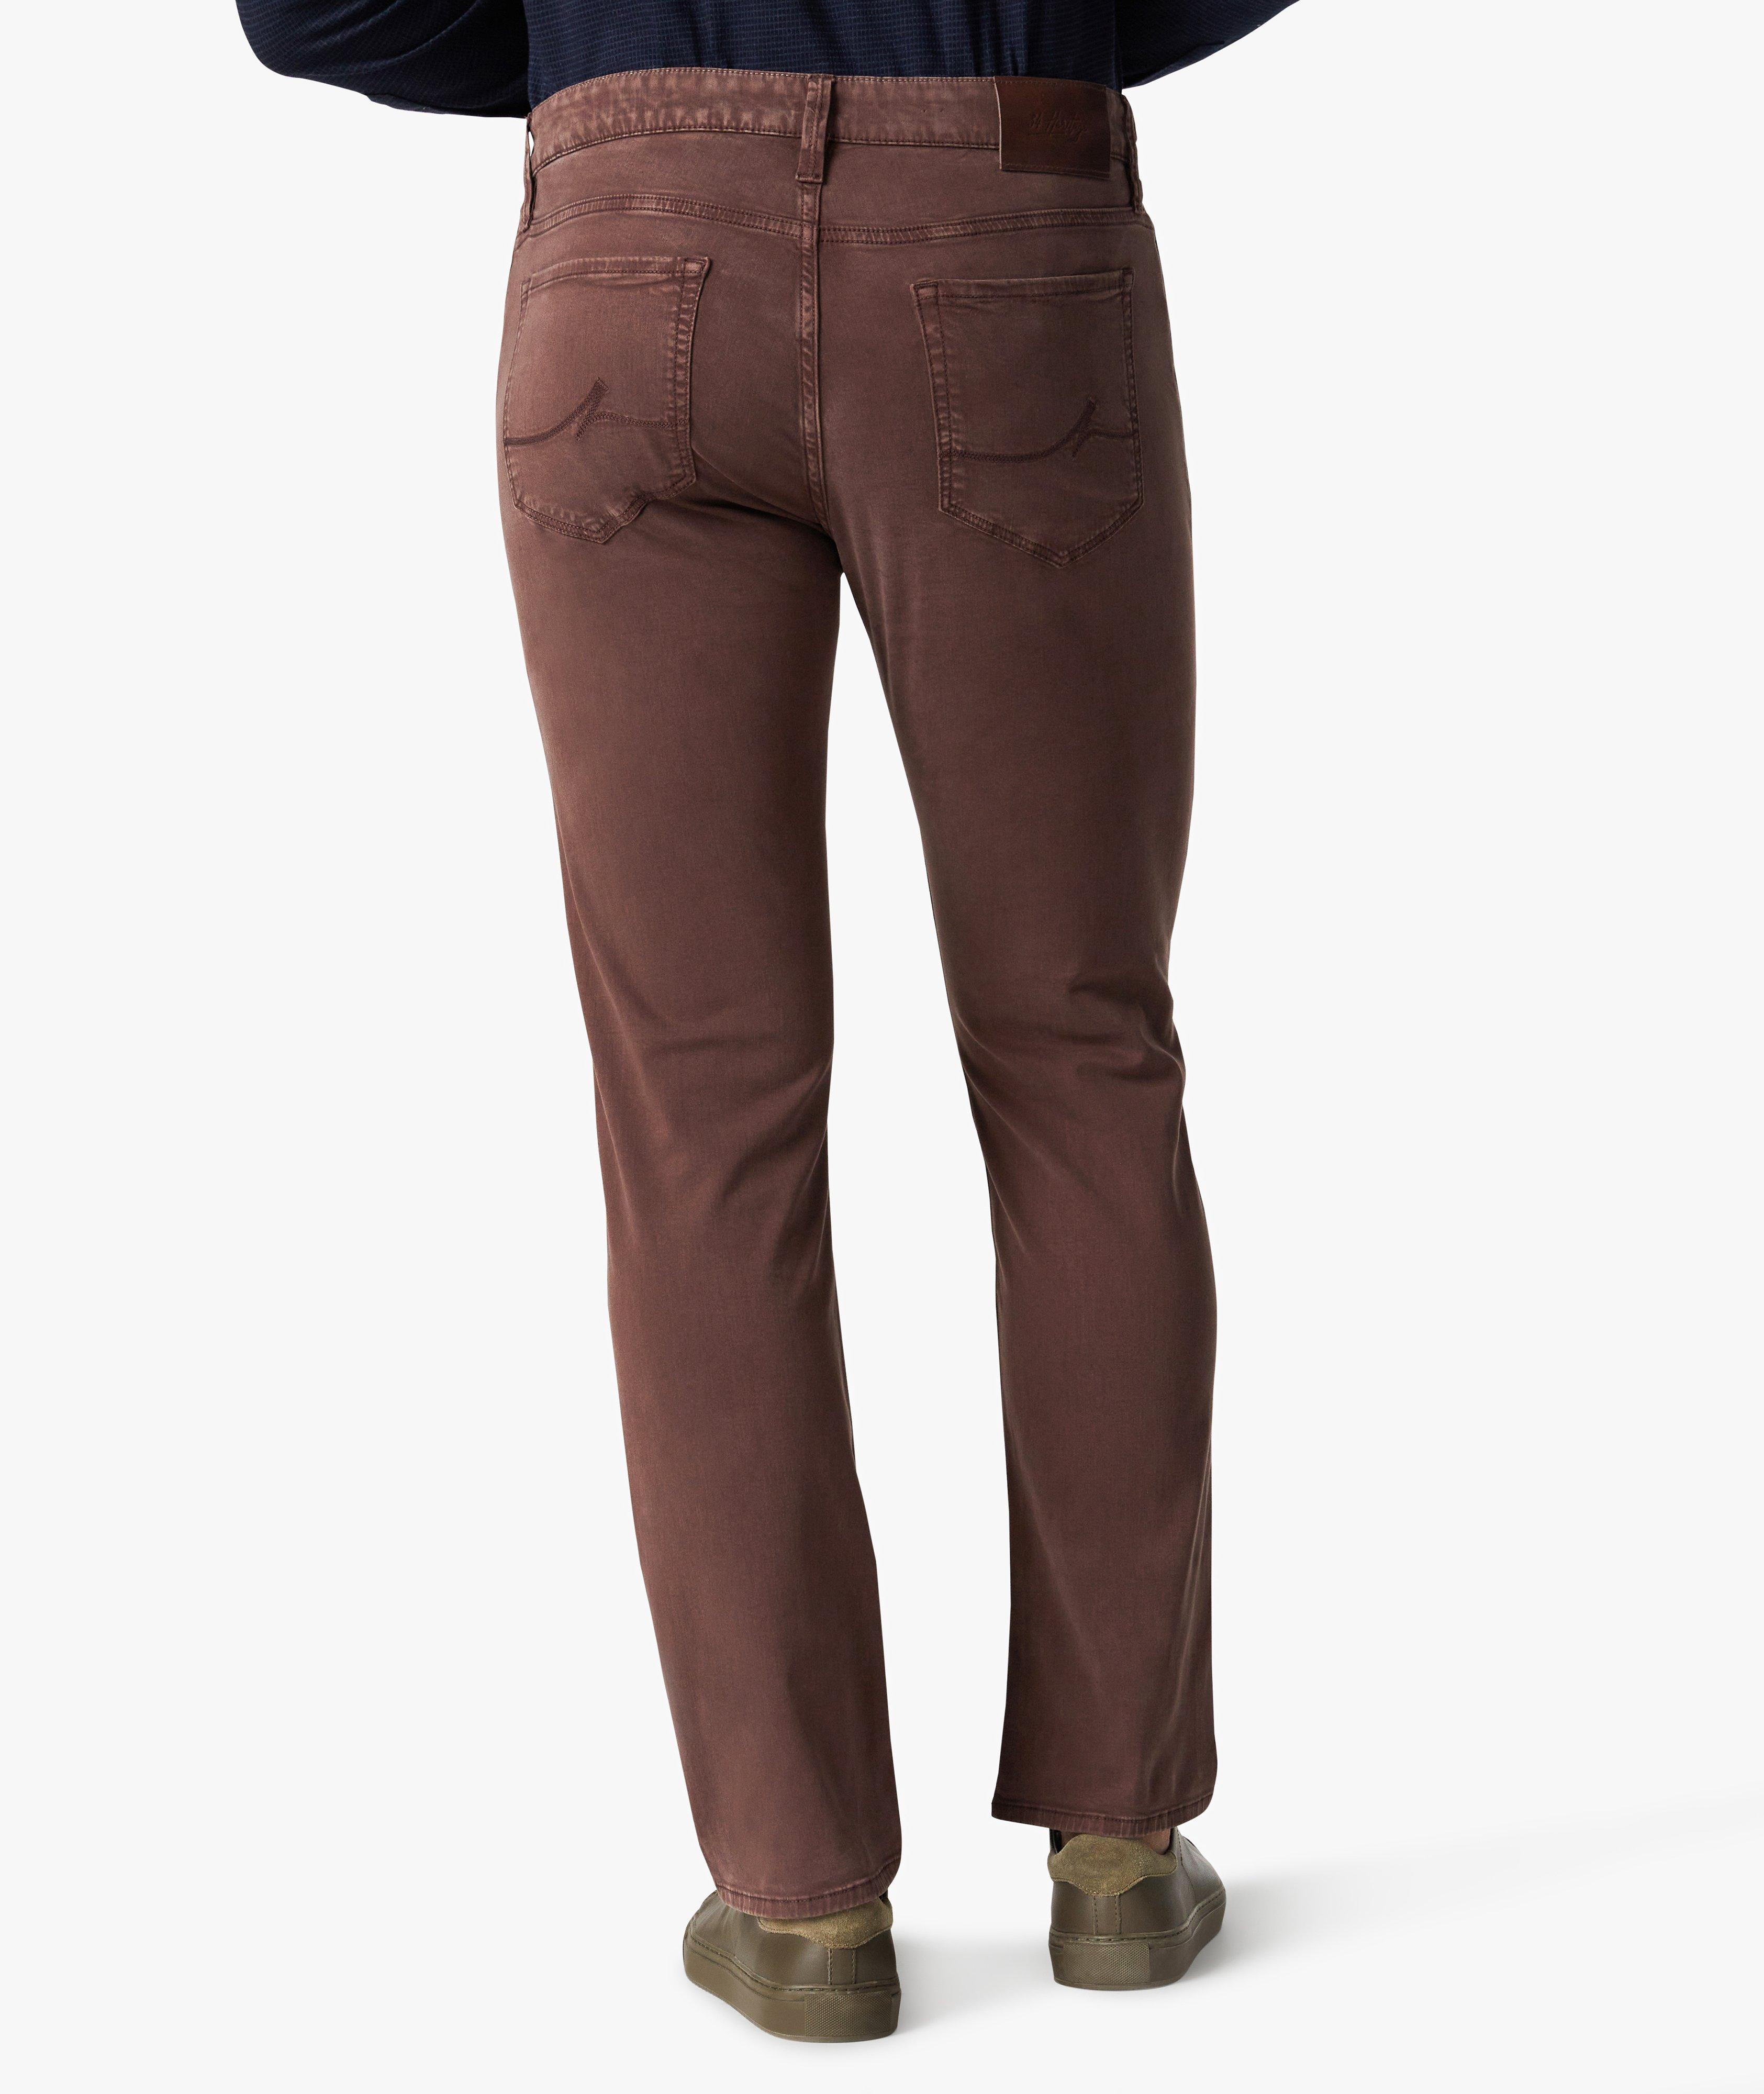 Courage Straight Leg Cotton Twill-Blend Pants image 2